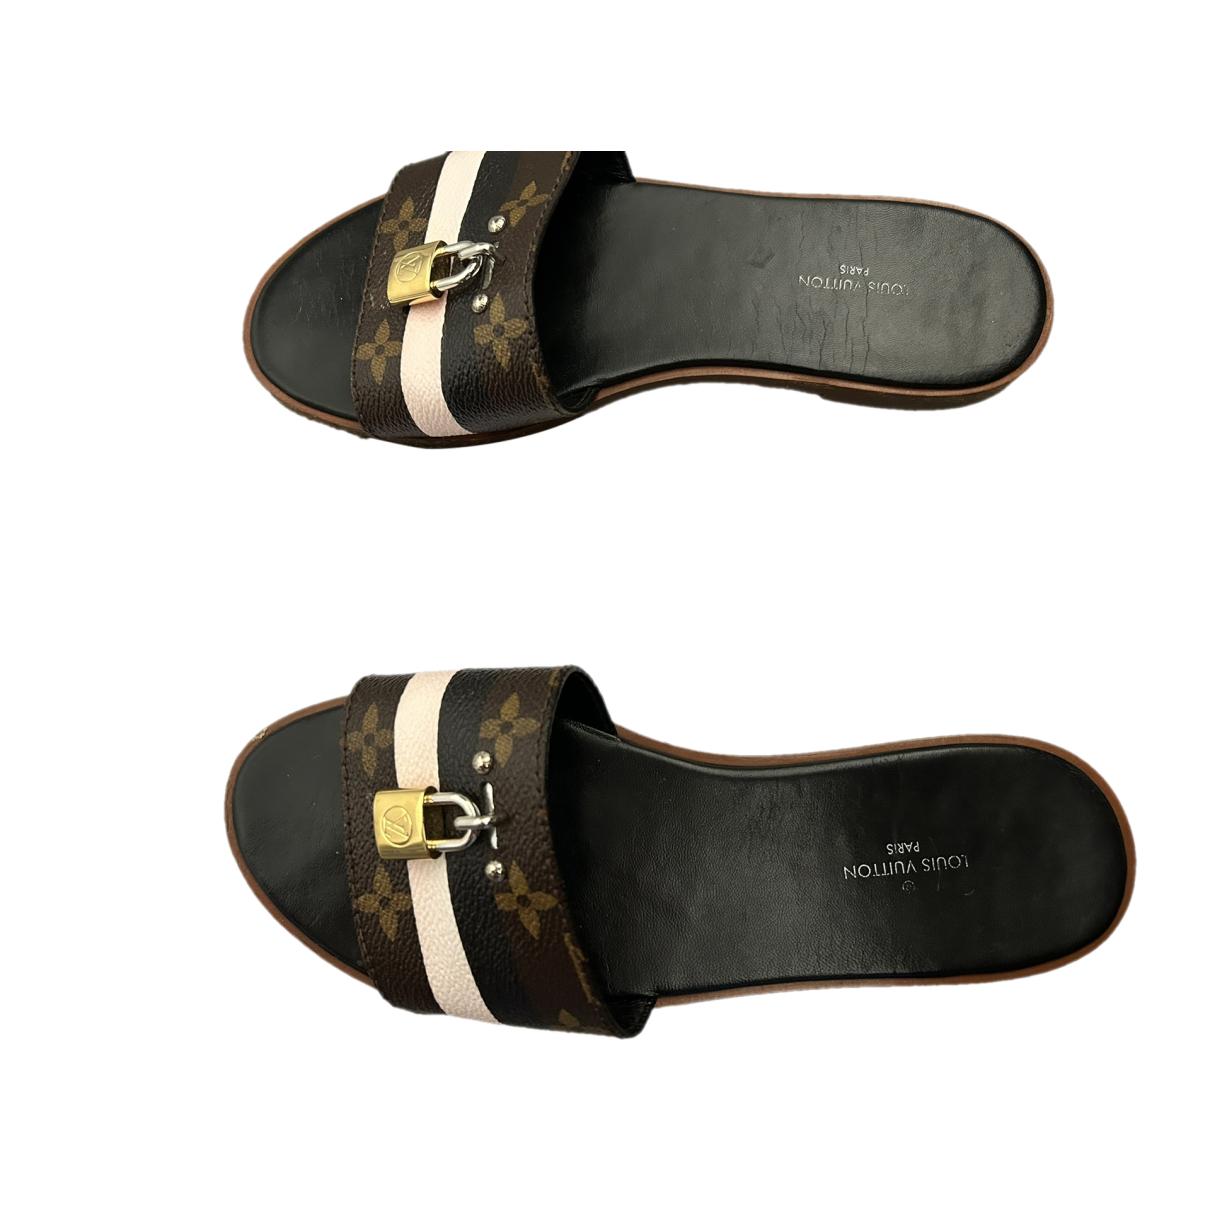 Louis Vuitton Sandals *WATCH THIS BEFORE BUYING* - (Lock It Flat Mules) 